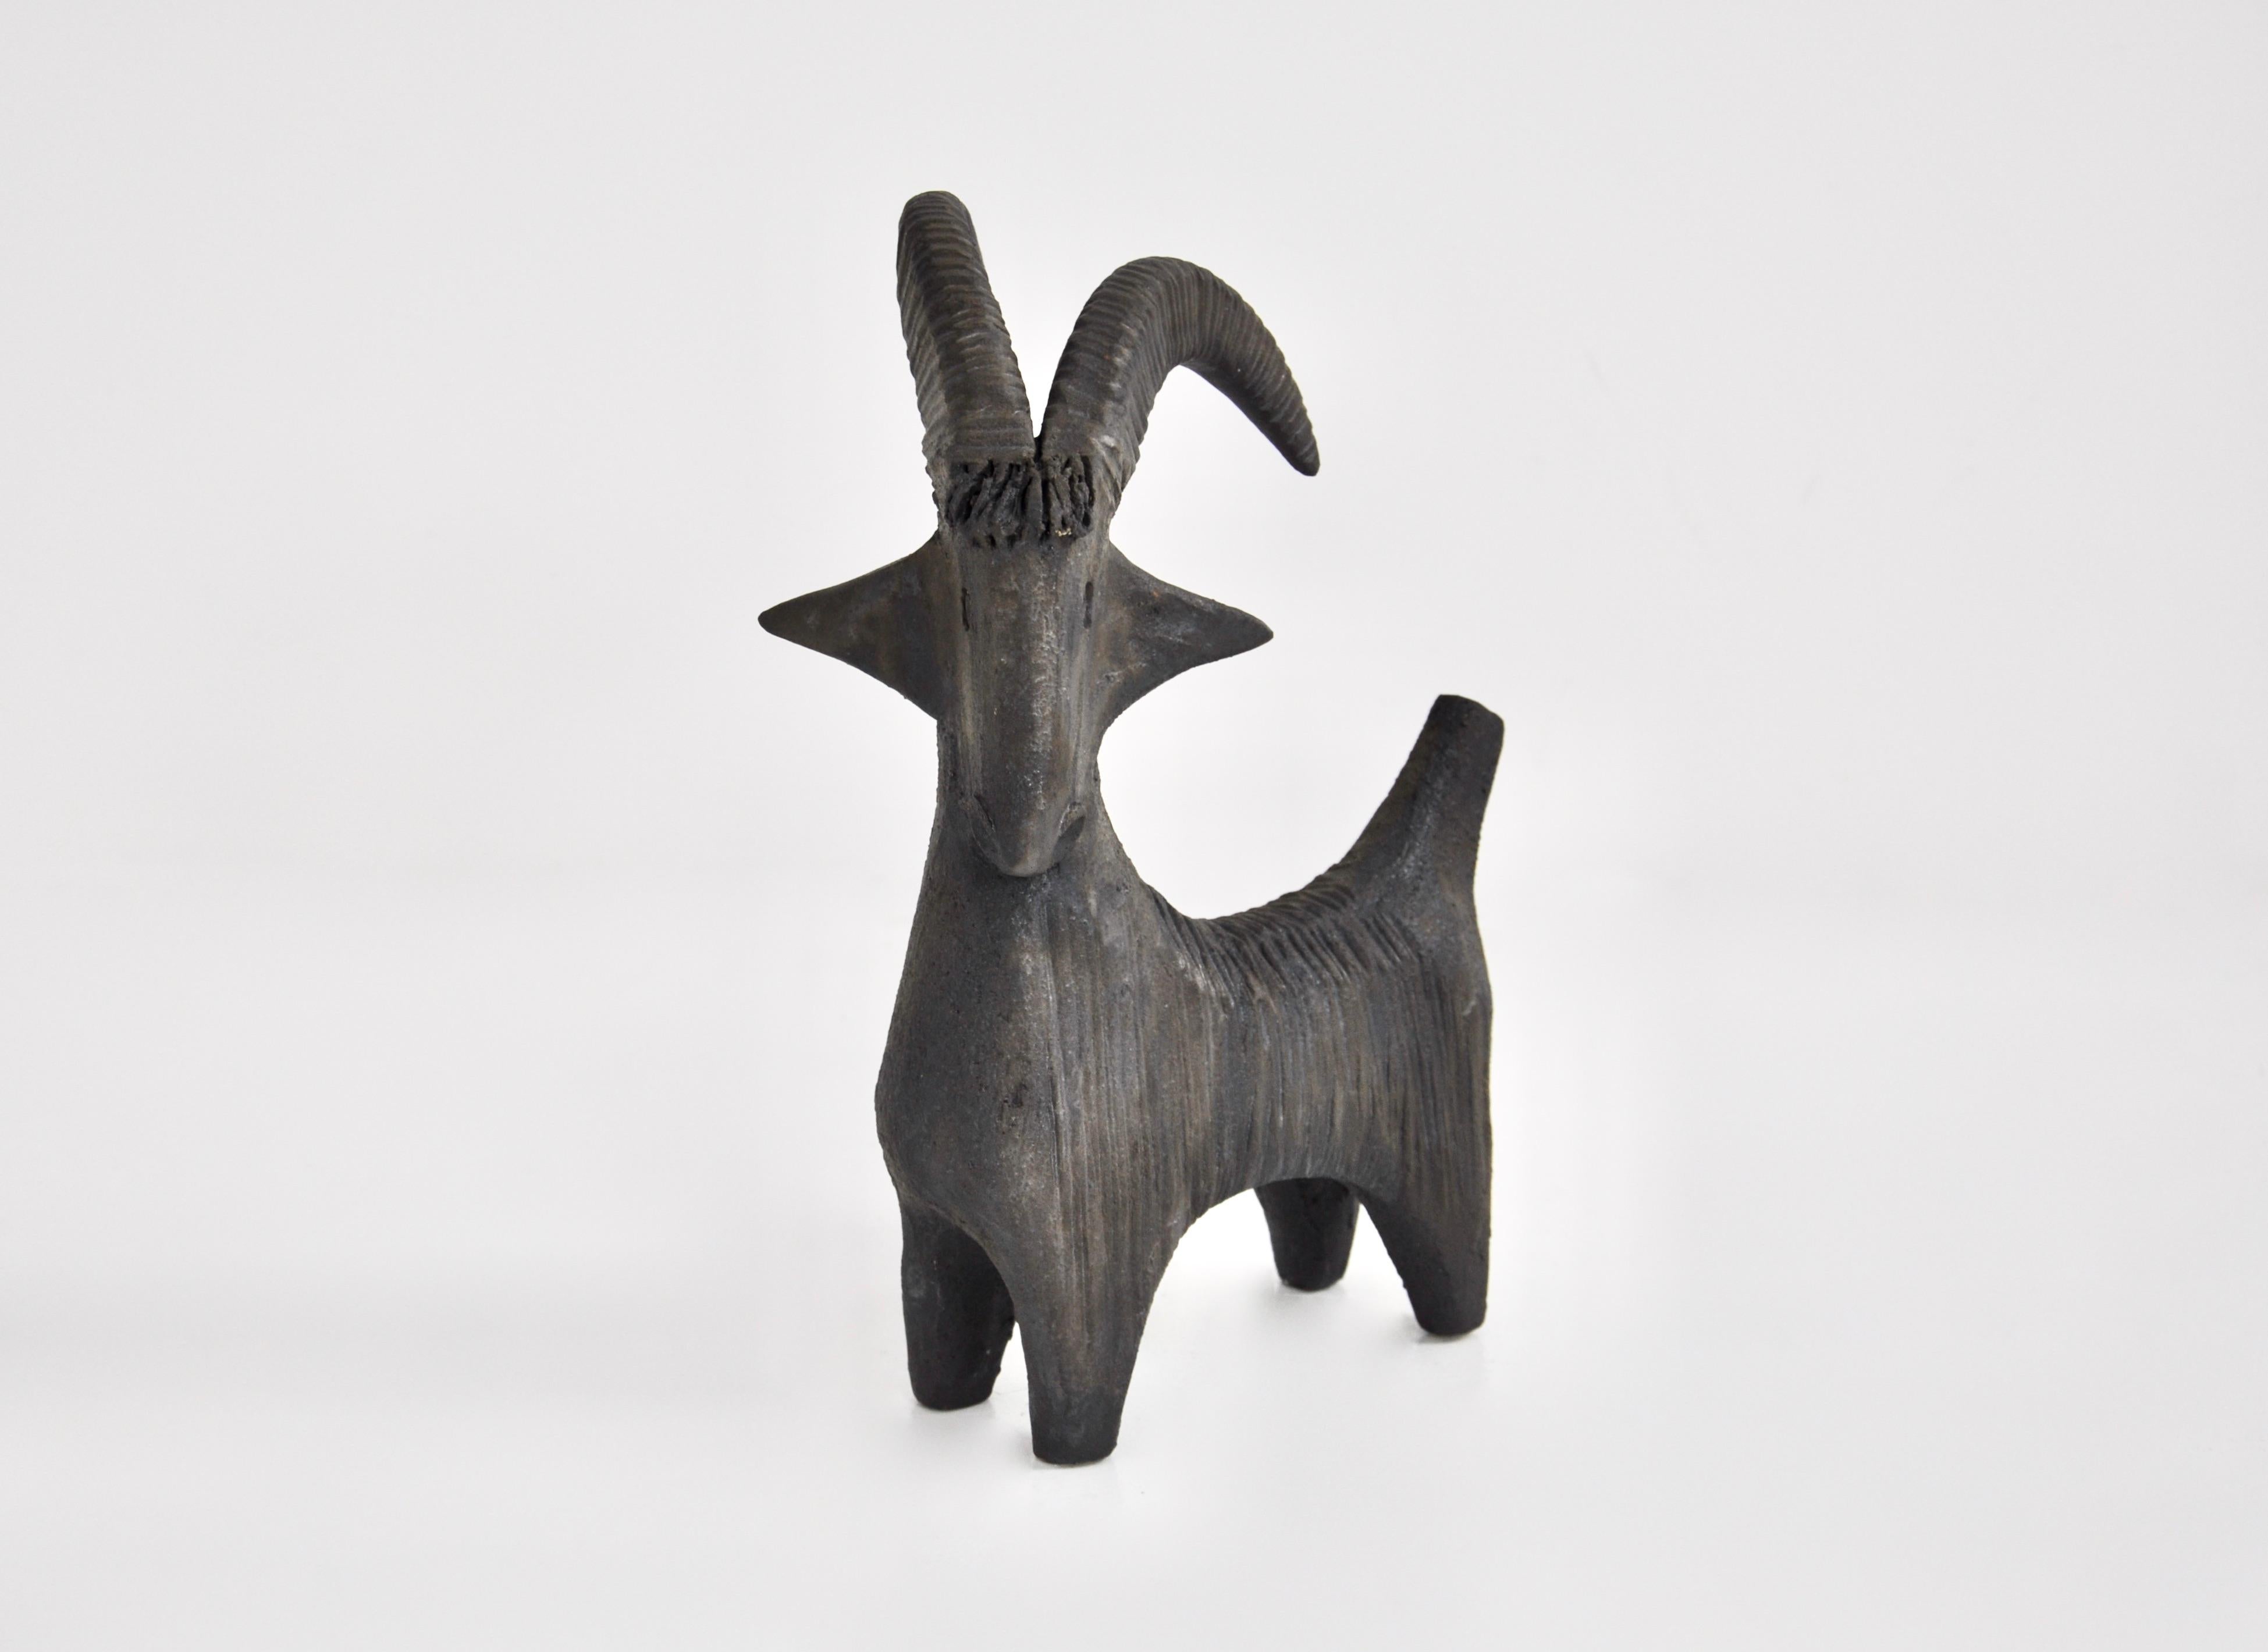  Ceramic in the shape of a goat designed by Dominique Pouchain. Stamped on the underside.